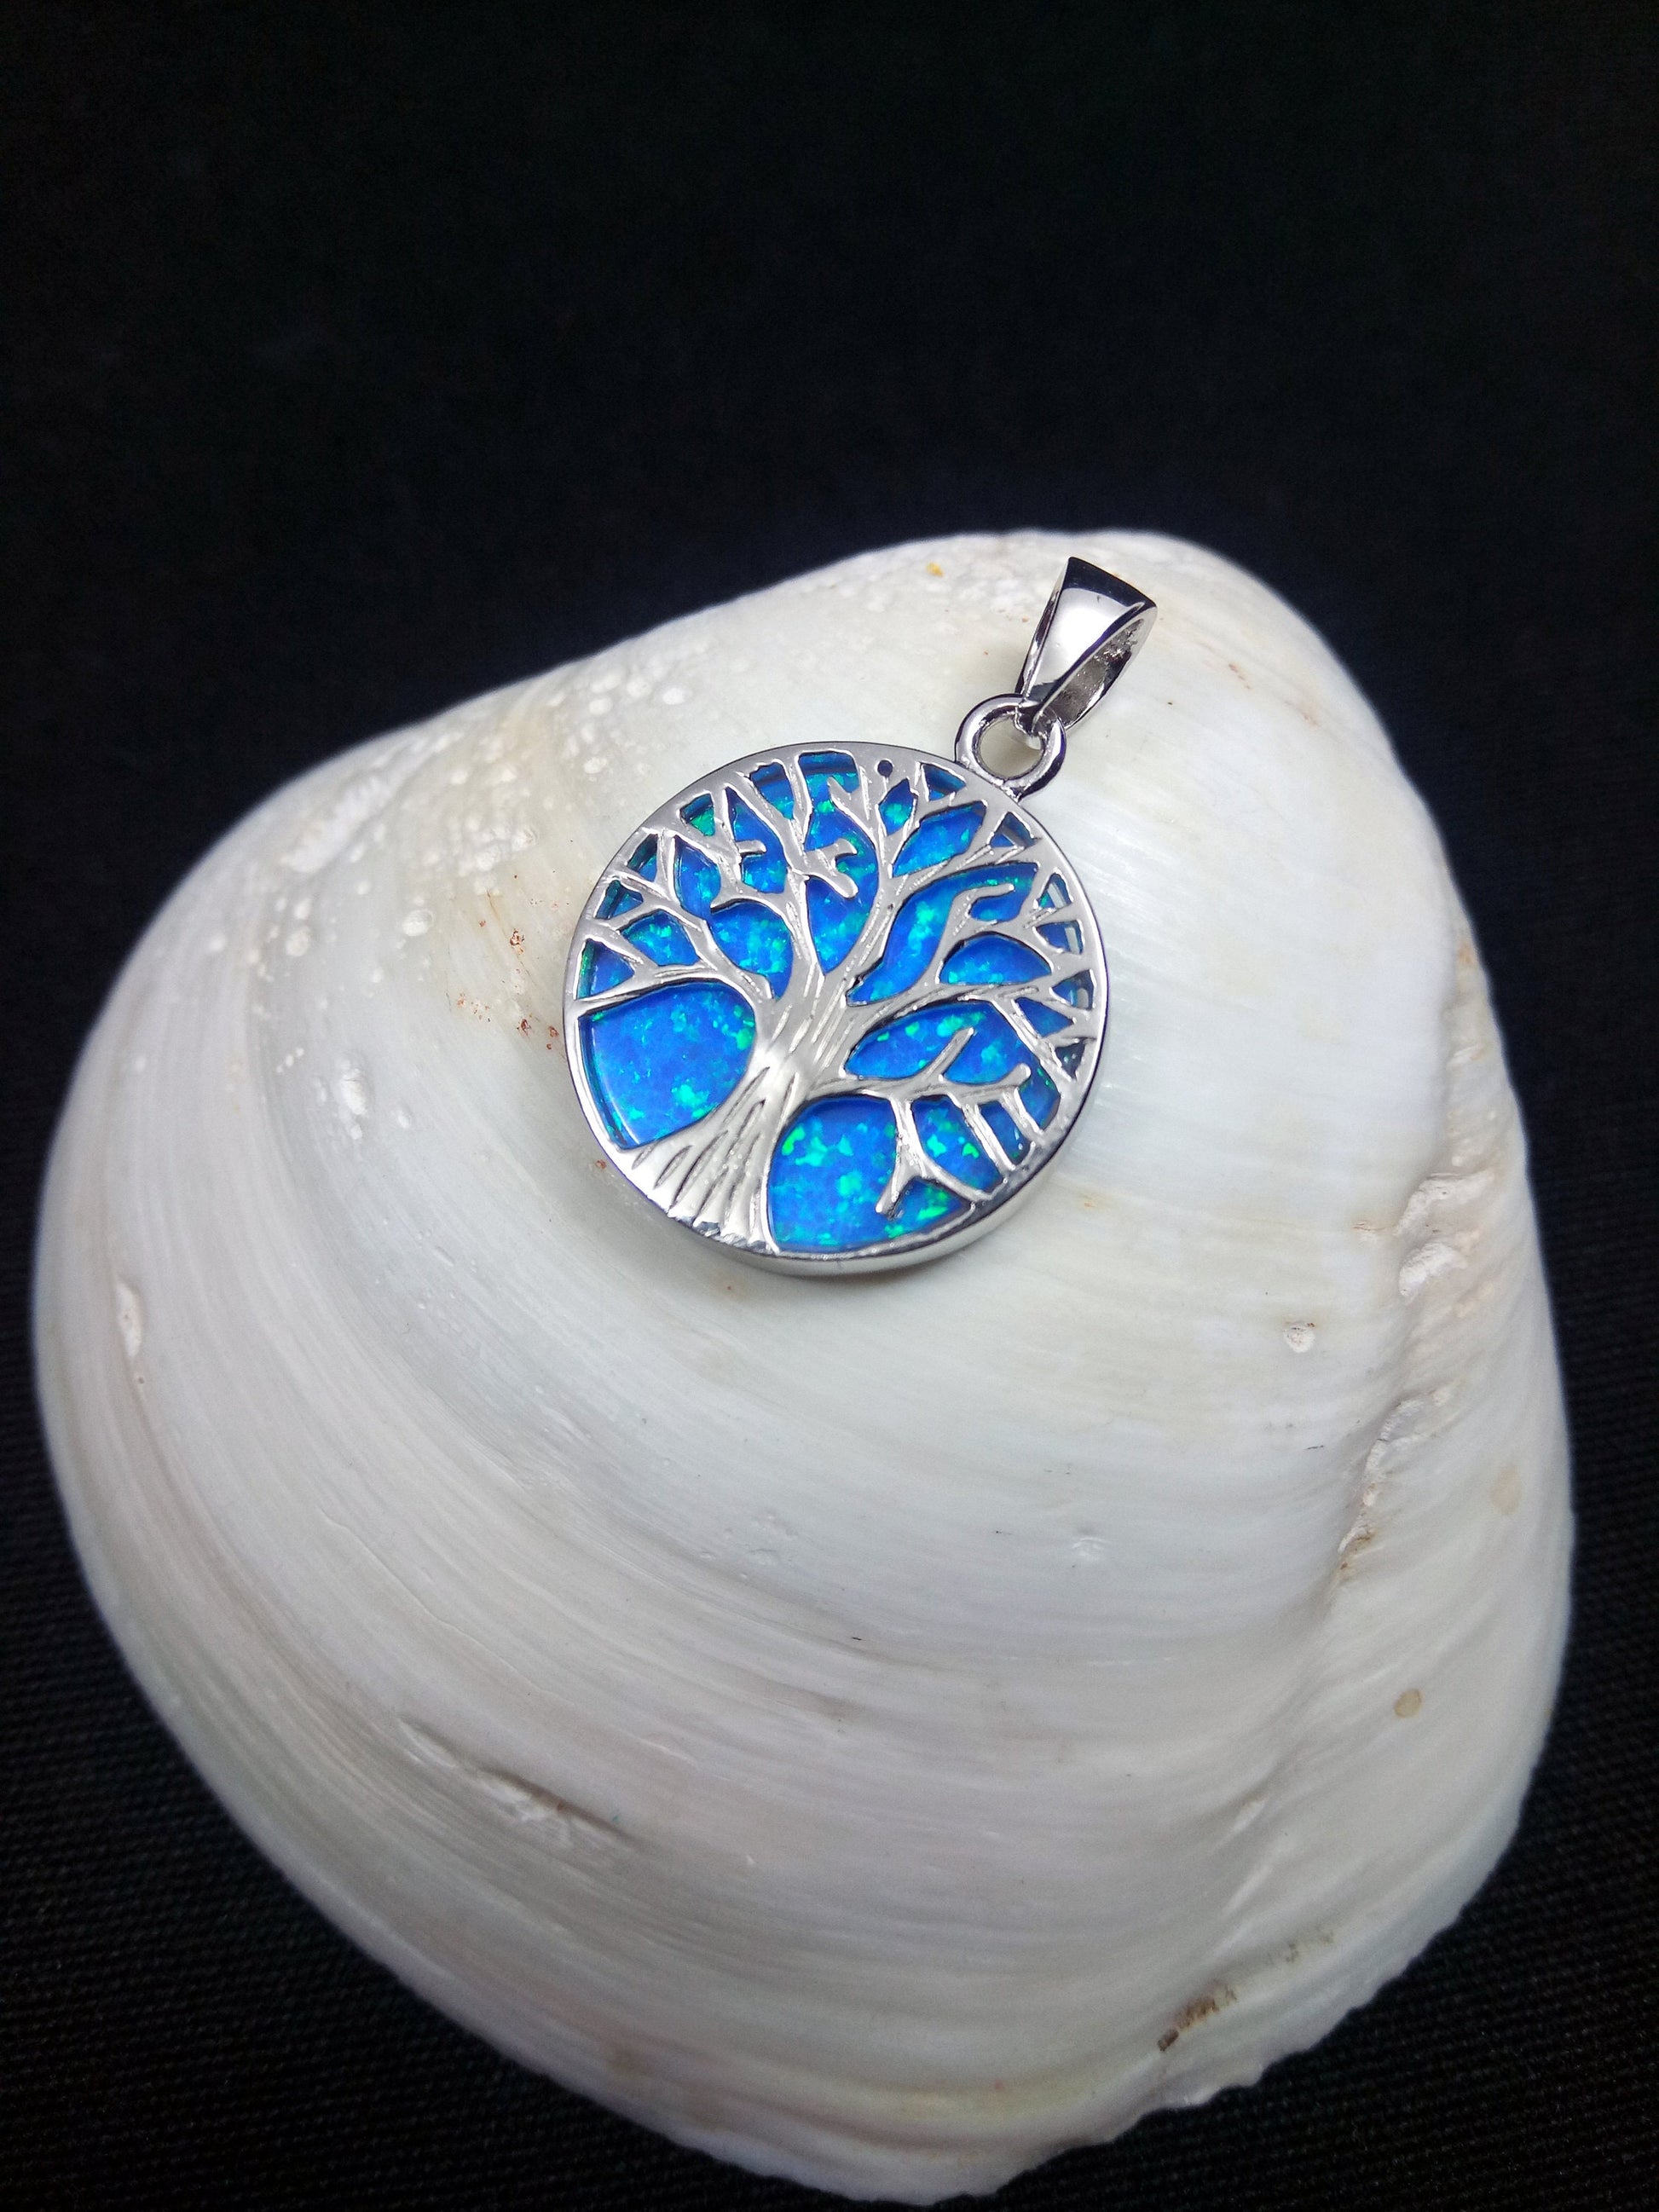 Sterling Silver 925 Blue Opal Tree of Life 18mm Pendant - A beautiful and unique pendant featuring a tree of life design made from sterling silver 925 and set with a stunning blue opal stone, measuring 18mm in diameter.